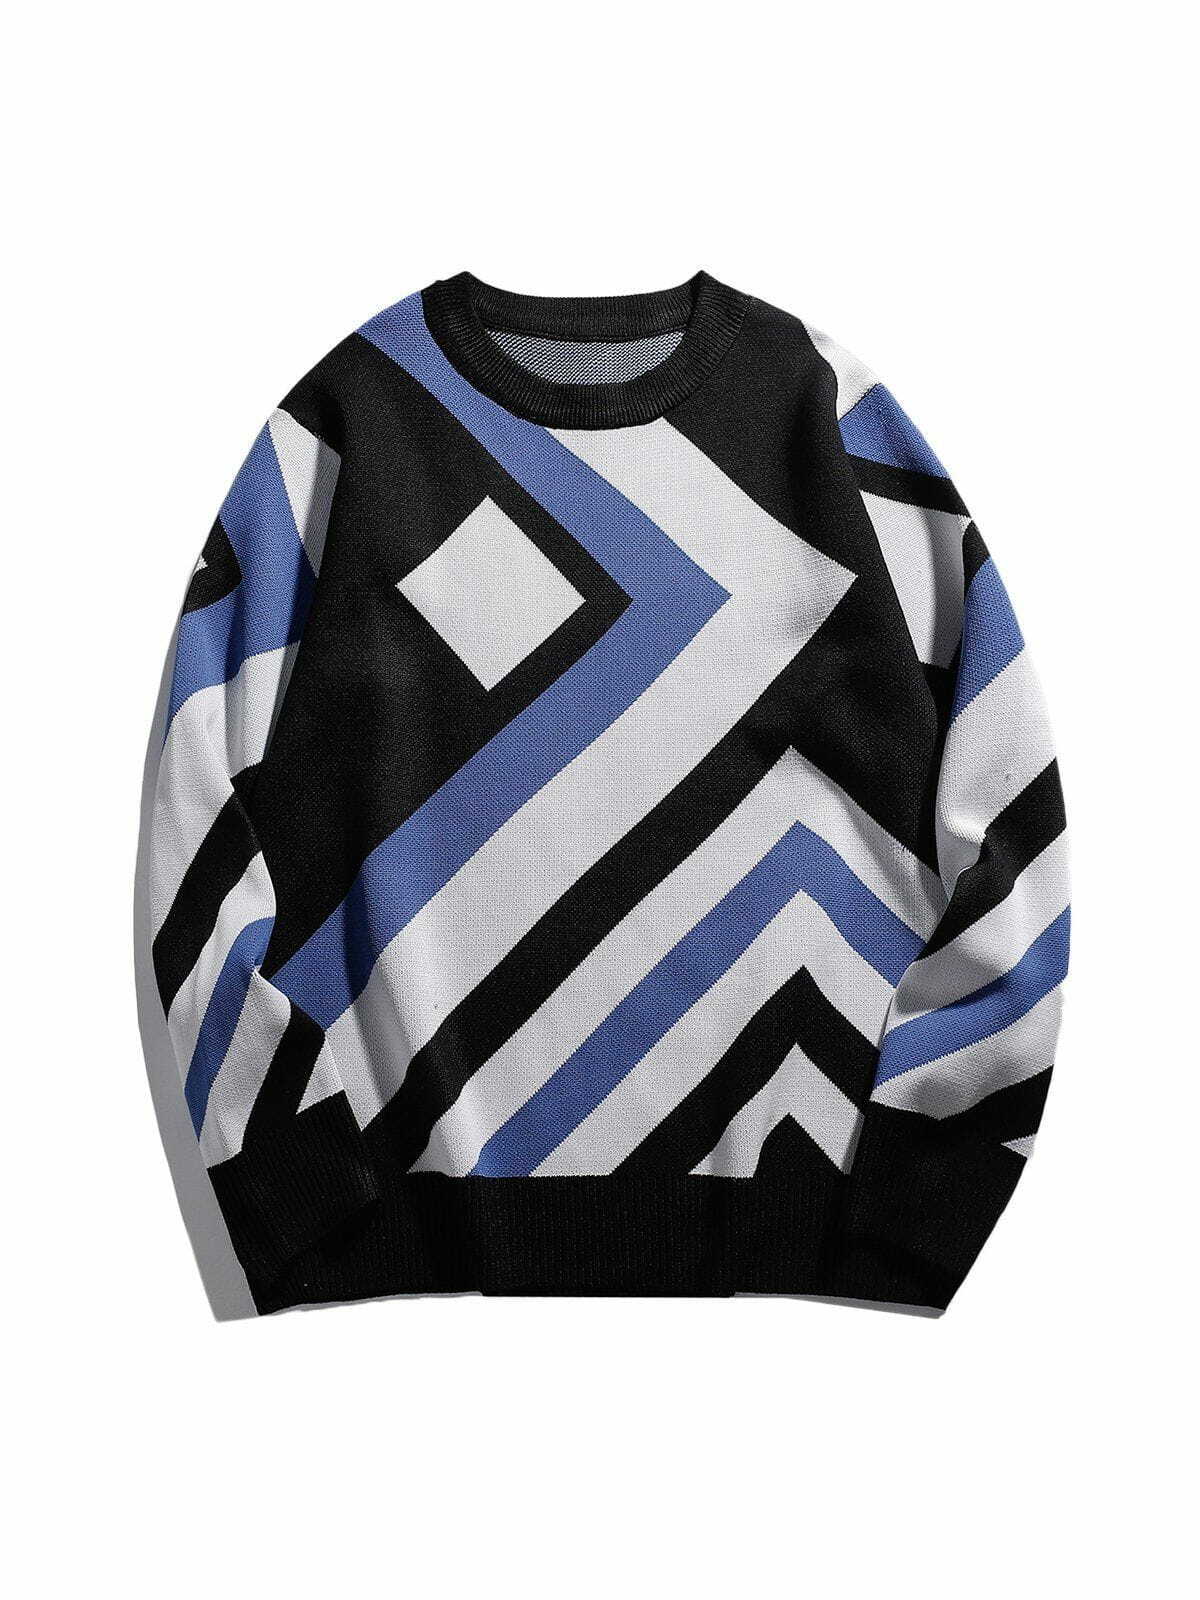 patchwork edgy casual sweater retro streetwear icon 3130